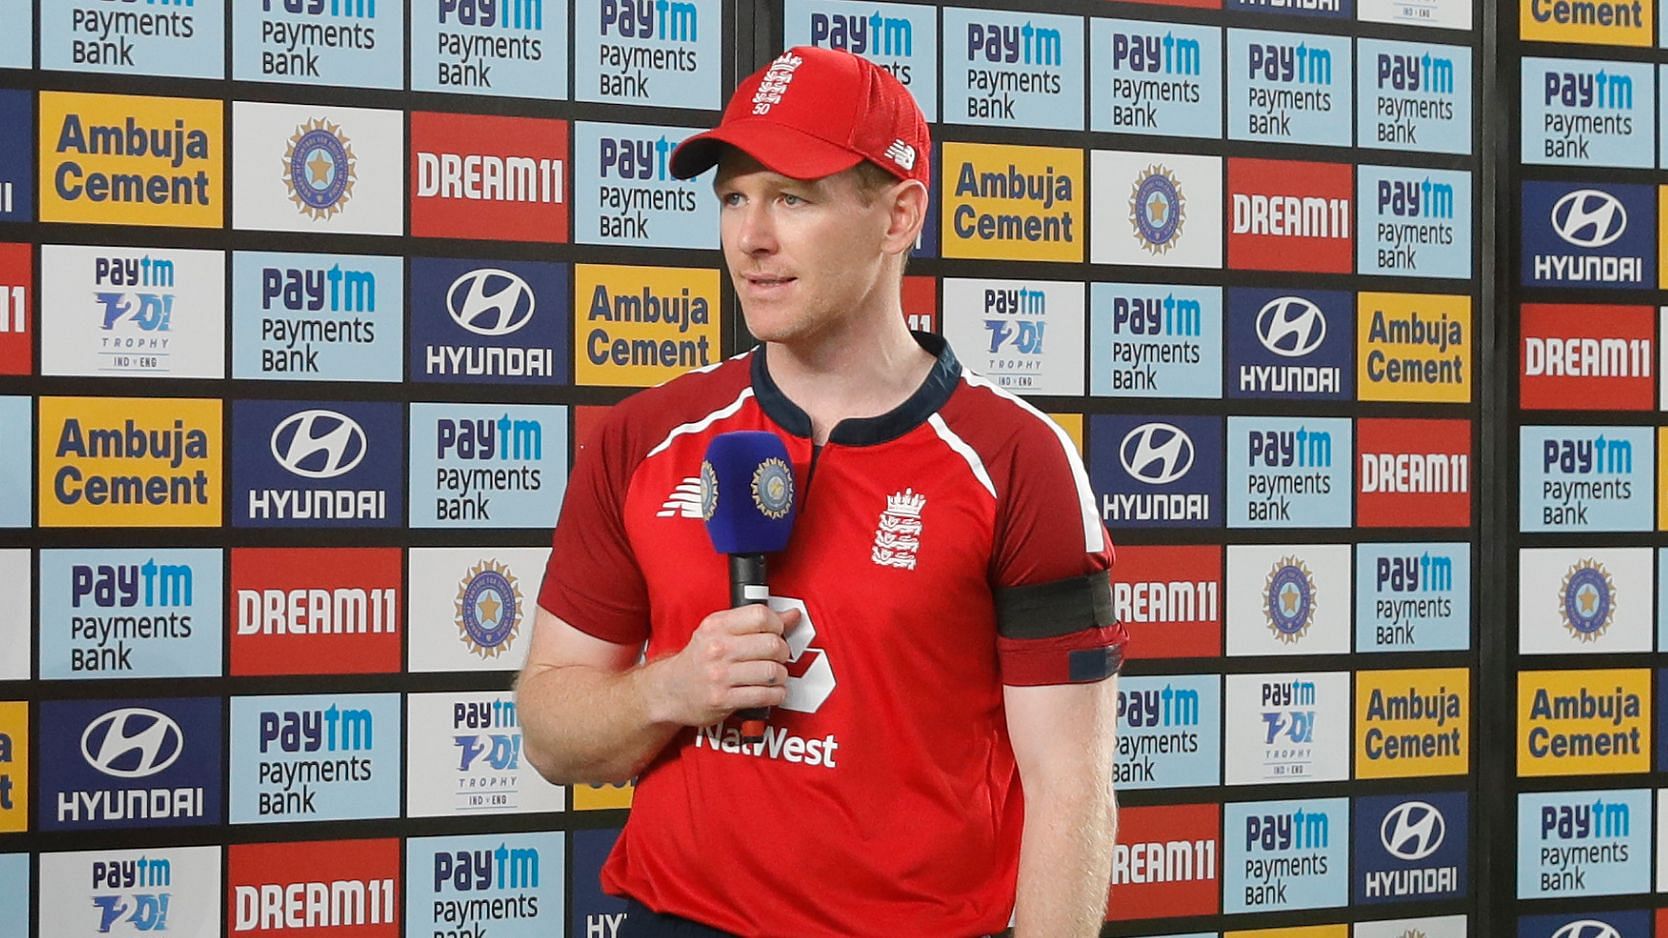 Eoin Morgan praised his team’s all-round effort after the 8 wicket victory over India on Friday.